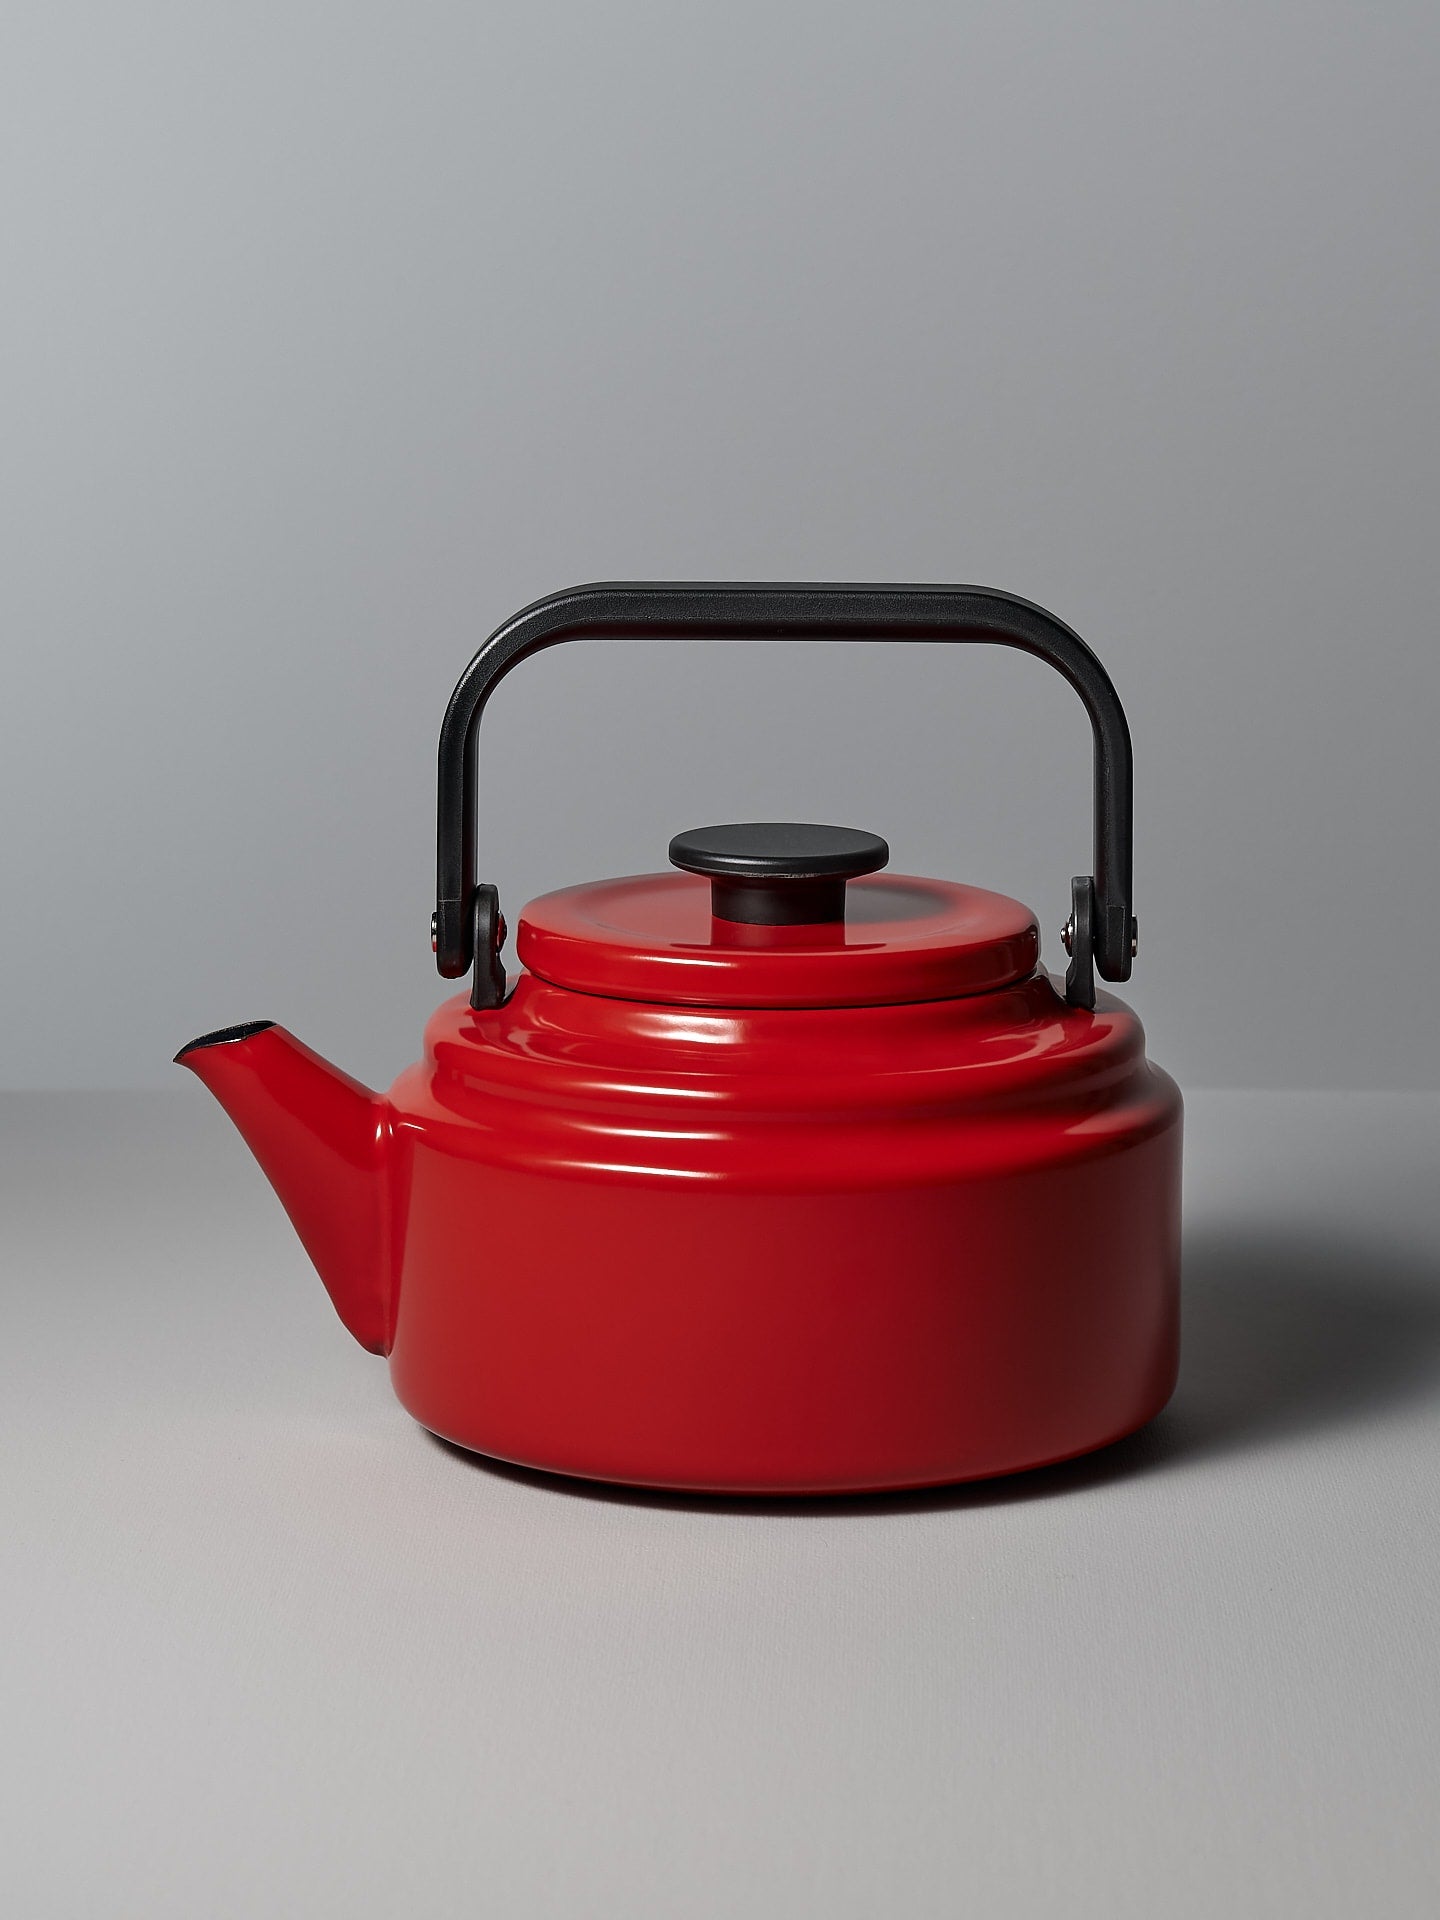 An Amu Stove-top Kettle - Red by Noda Horo on a grey background.